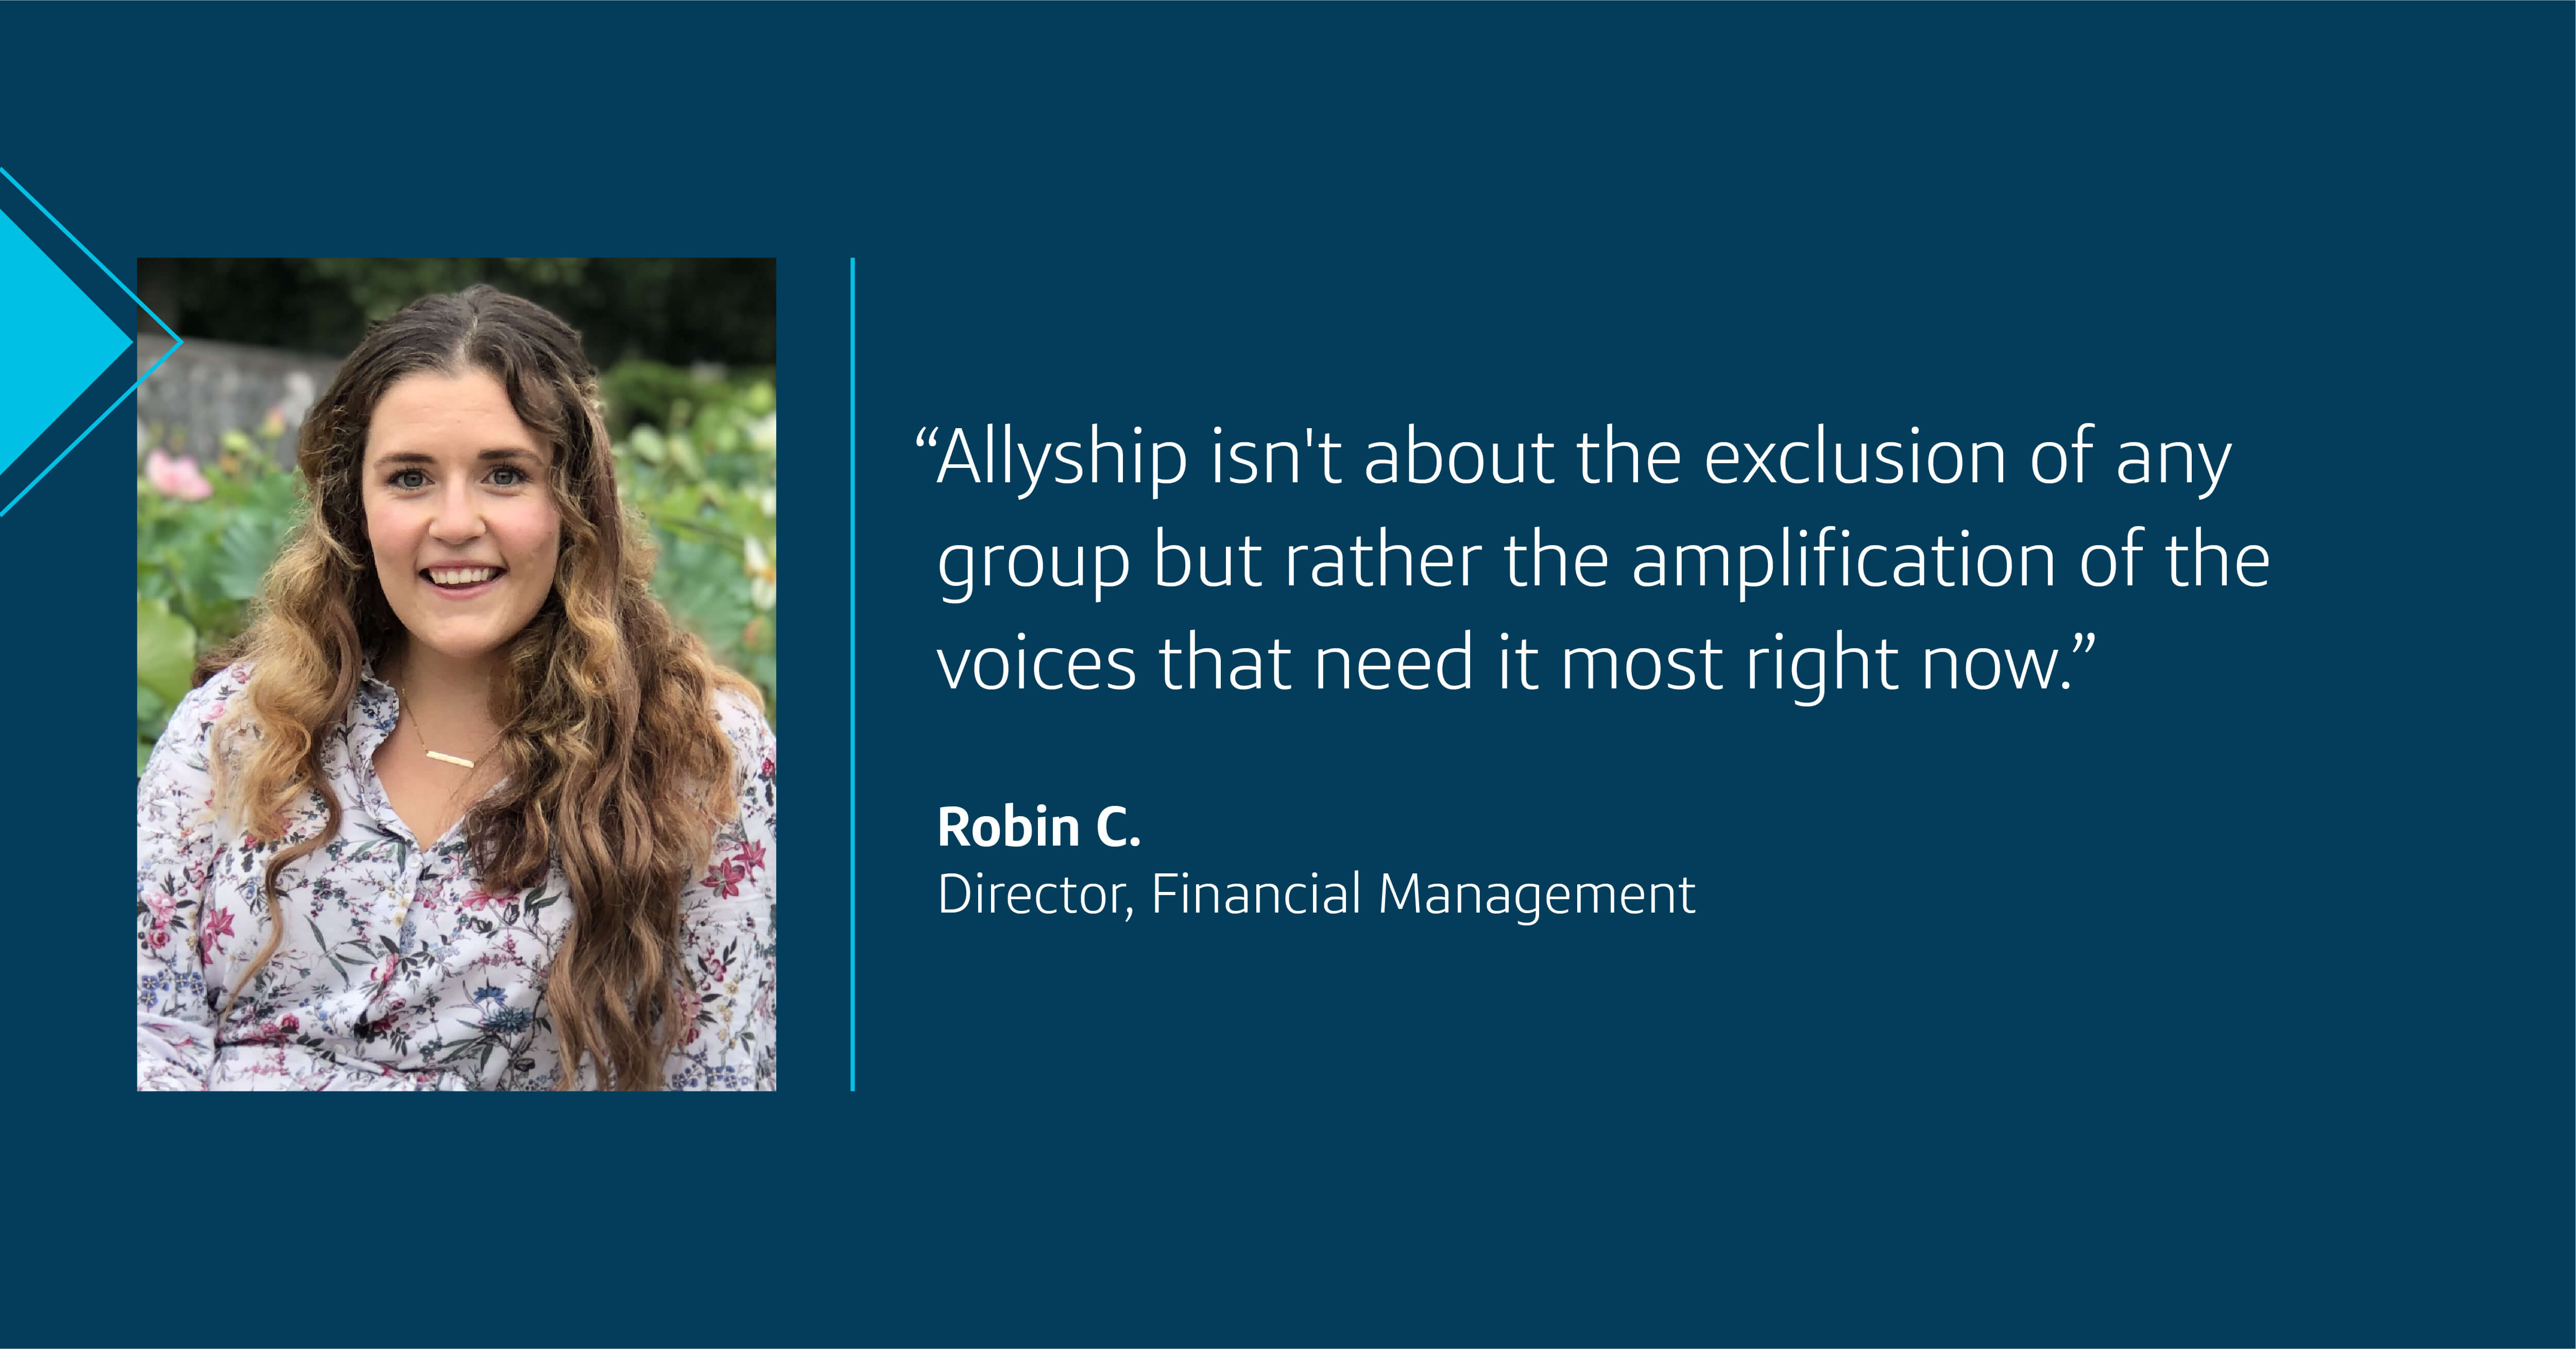 A picture of Robin, Capital One associate, with her quote, "Allyship isn